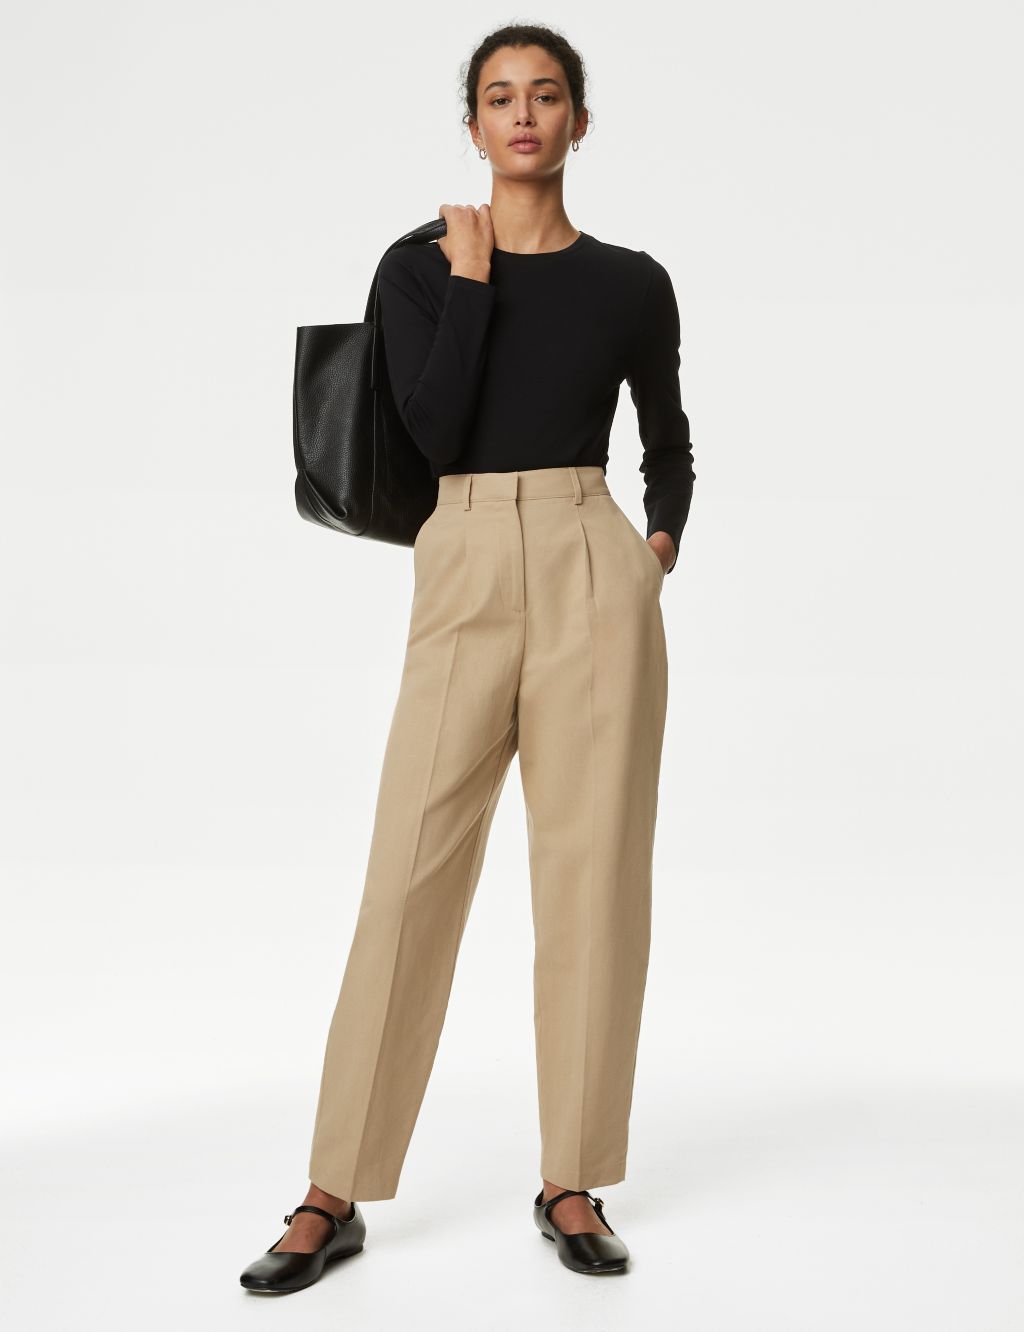 Women's High-rise Pleat Front Straight Chino Pants - A New Day